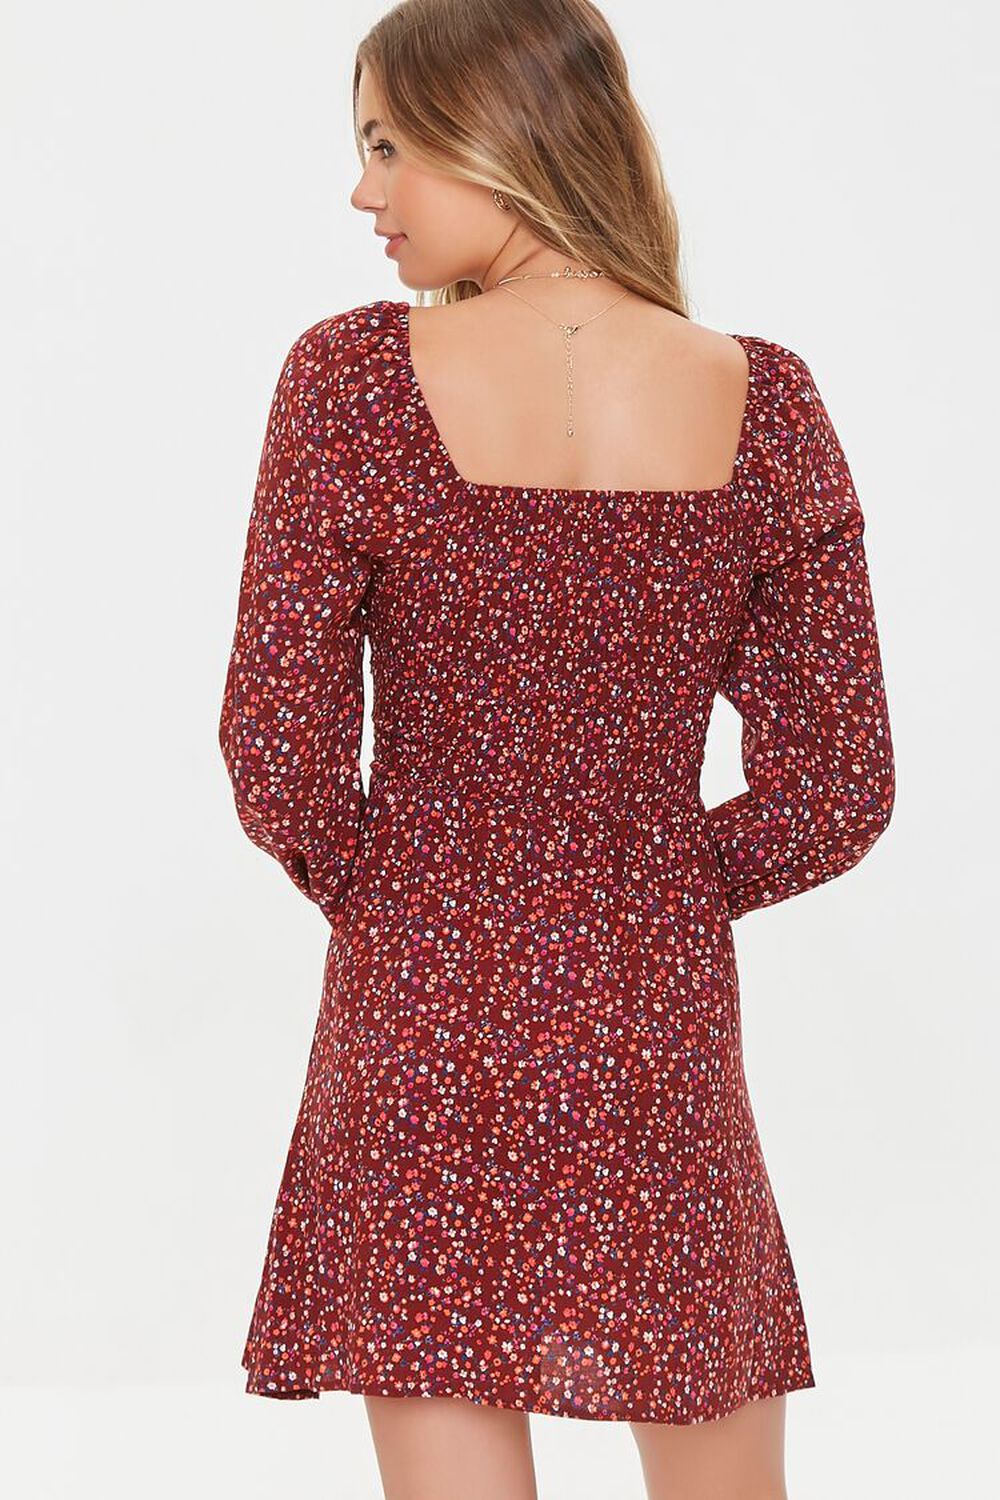 BURGUNDY/MULTI Ditsy Floral Ruched Mini Dress, image 3